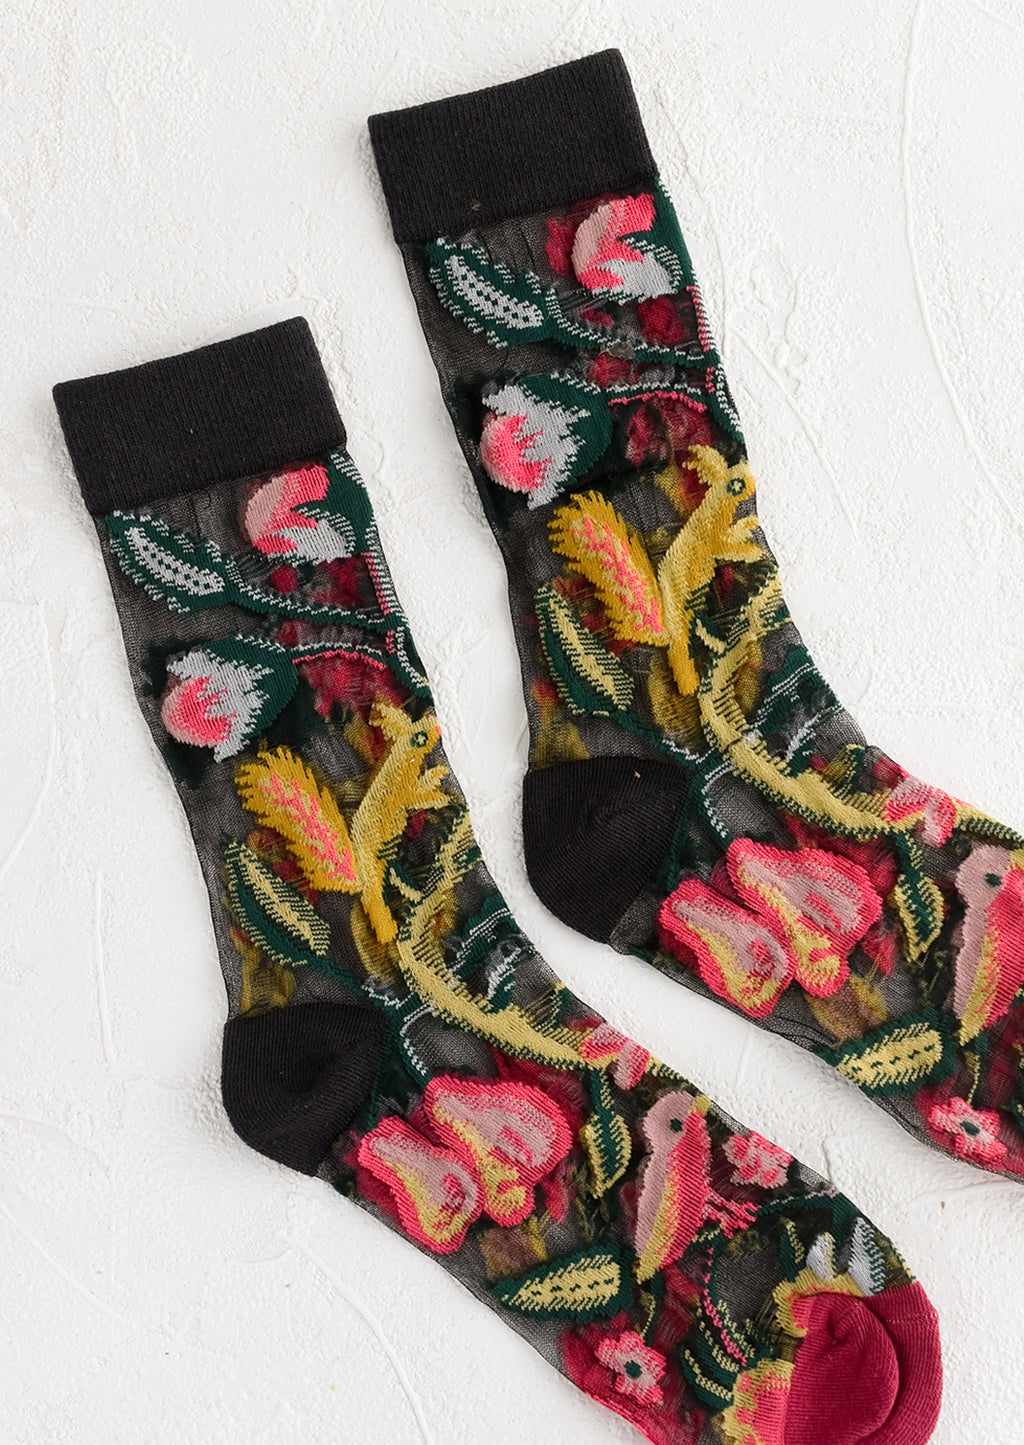 1: A pair of sheer black socks with multicolor creature print.